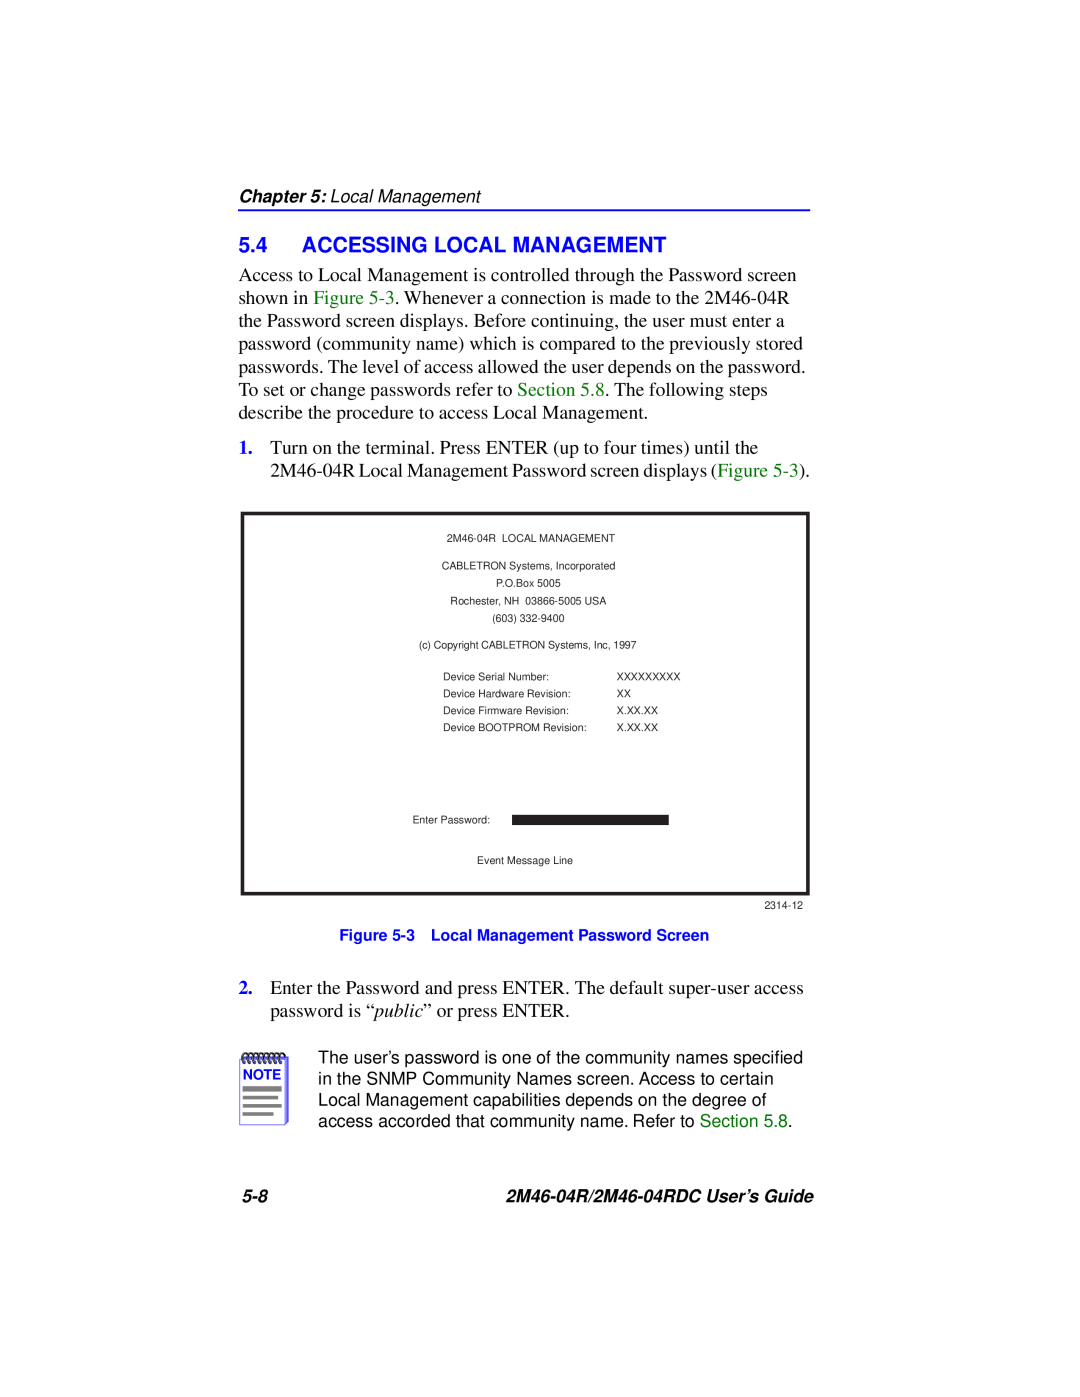 Cabletron Systems pmn manual Accessing Local Management 